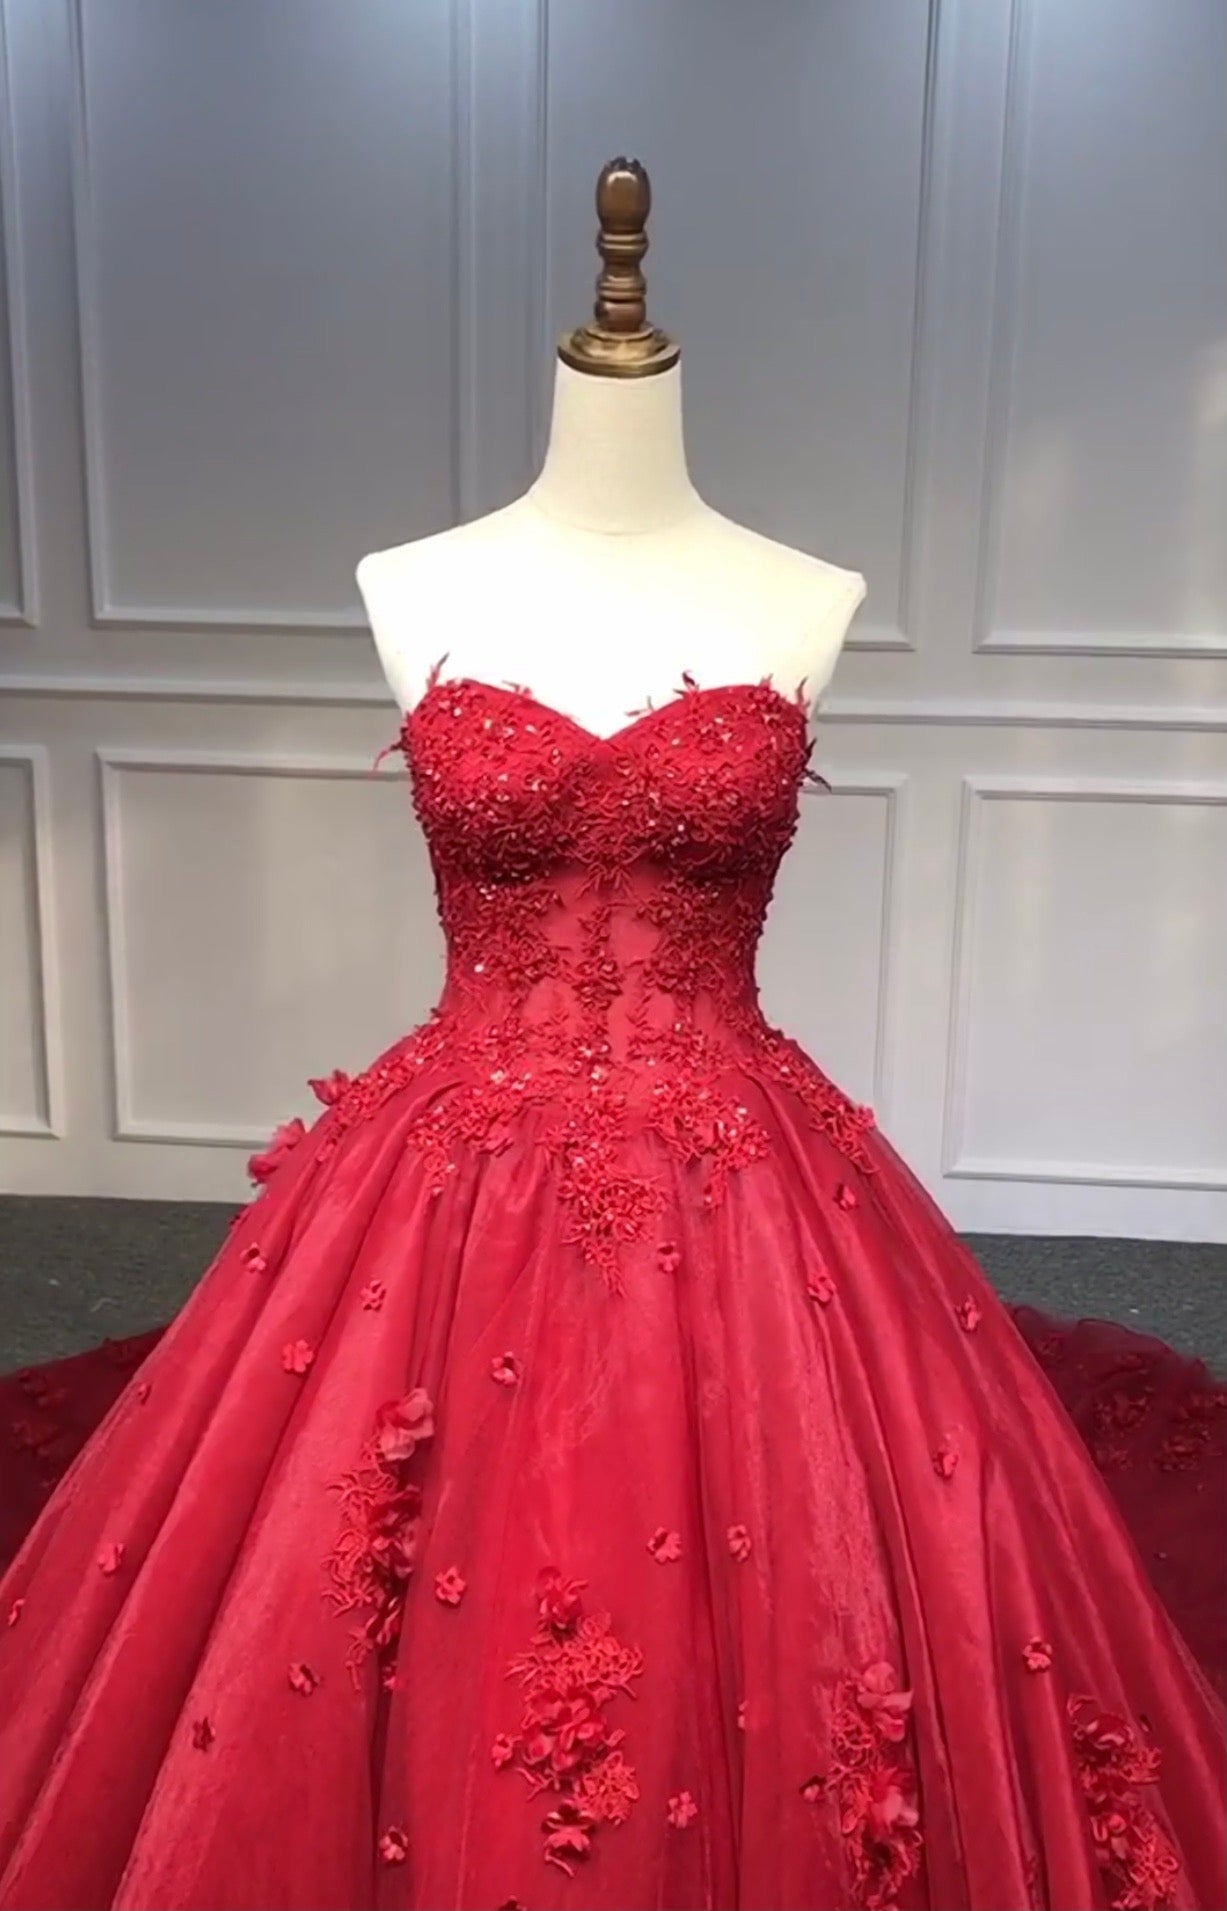 Stunning Dark Red 3D Rose Flower Red Gown For Wedding With Cathedral Train  Perfect For Arabic Middle Eastern Church Weddings From Queenshoebox, $171.3  | DHgate.Com